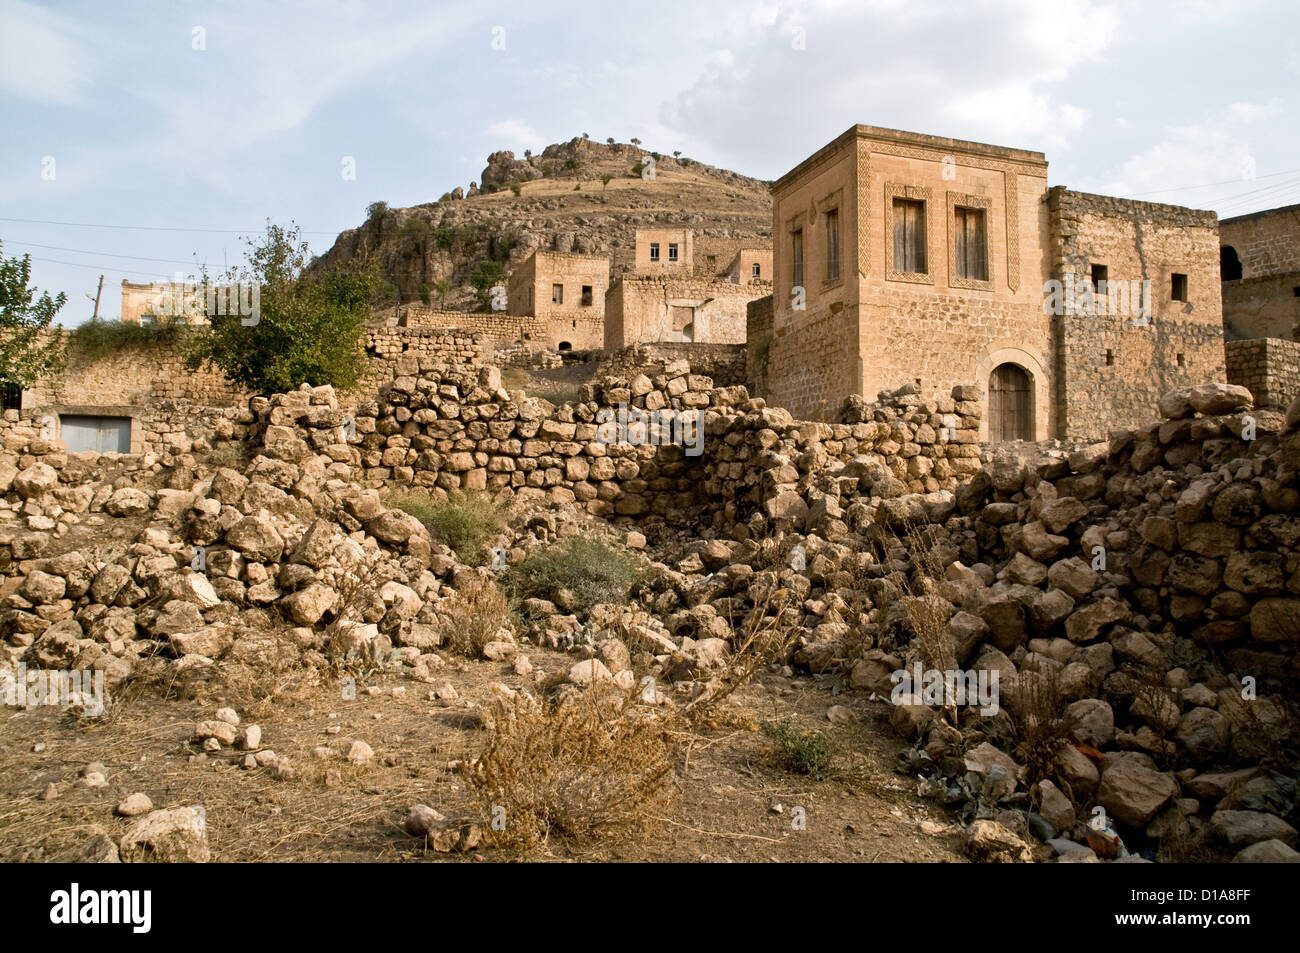 Honey-coloured stone houses in the ancient village of Dereici, in the Syriac Tur Abdin region of southeastern Turkey. Stock Photo